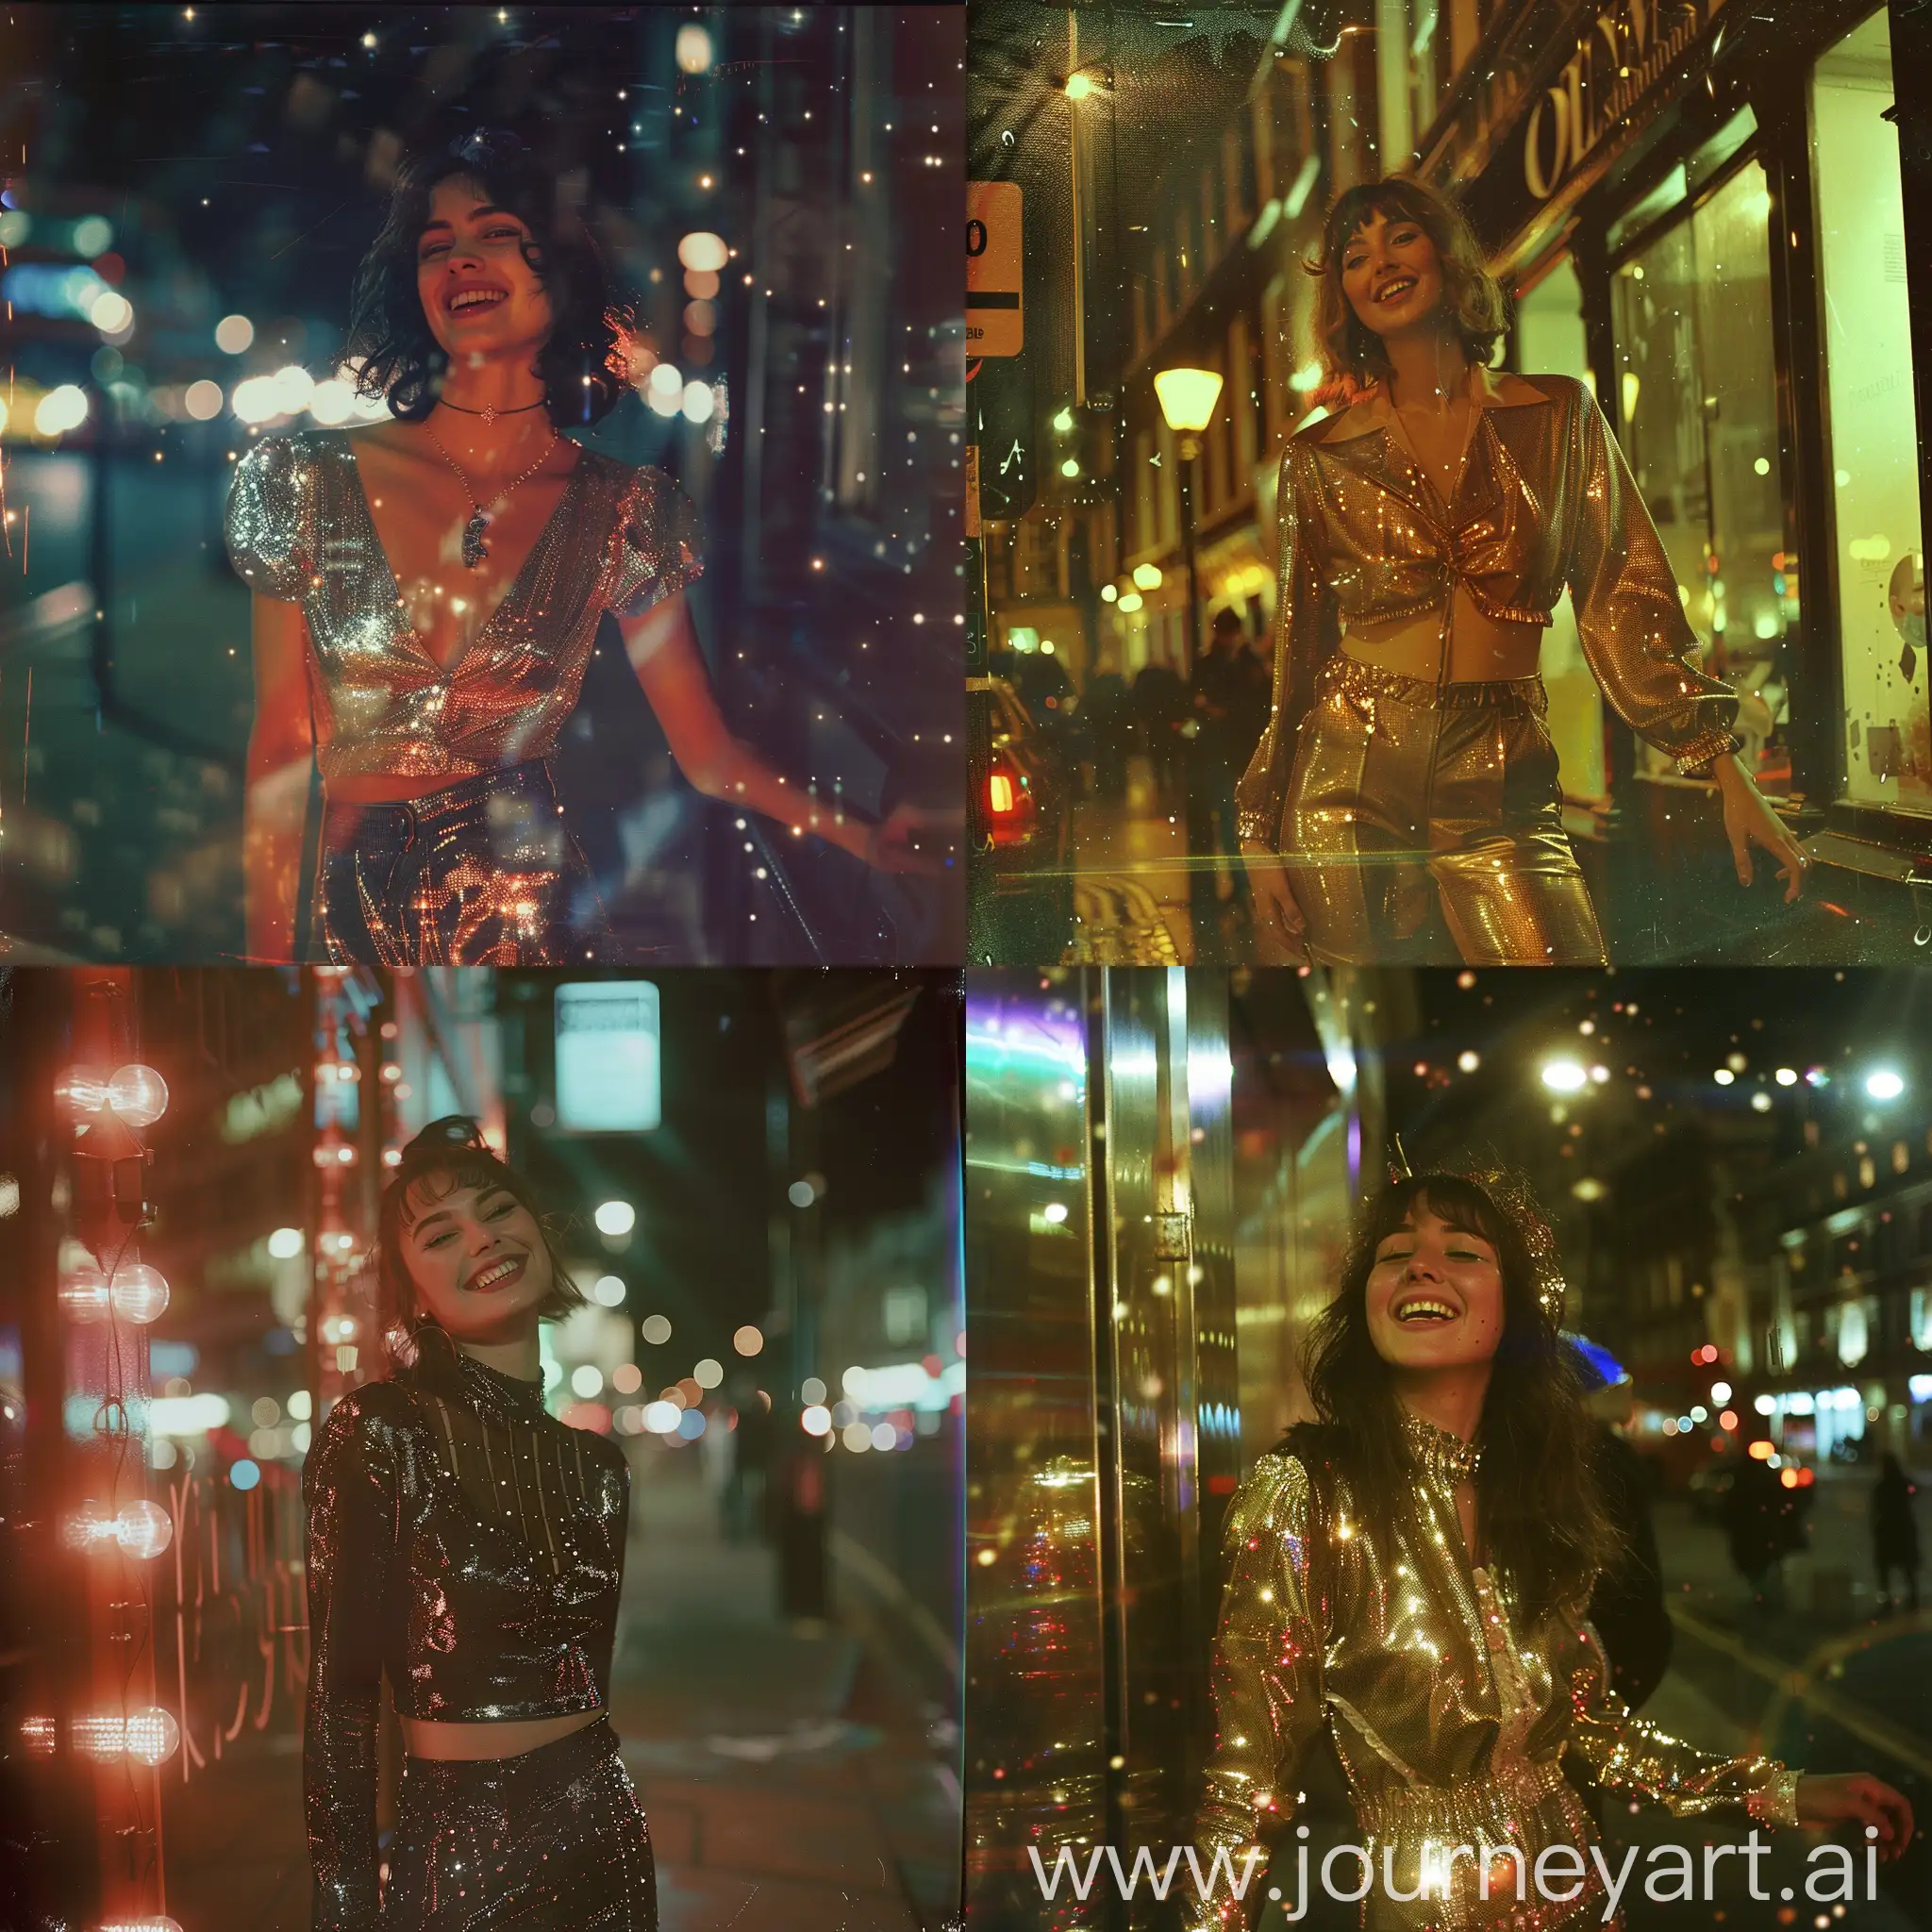 Candid-London-Girl-in-Retro-Shiny-Outfit-Night-Street-Photography